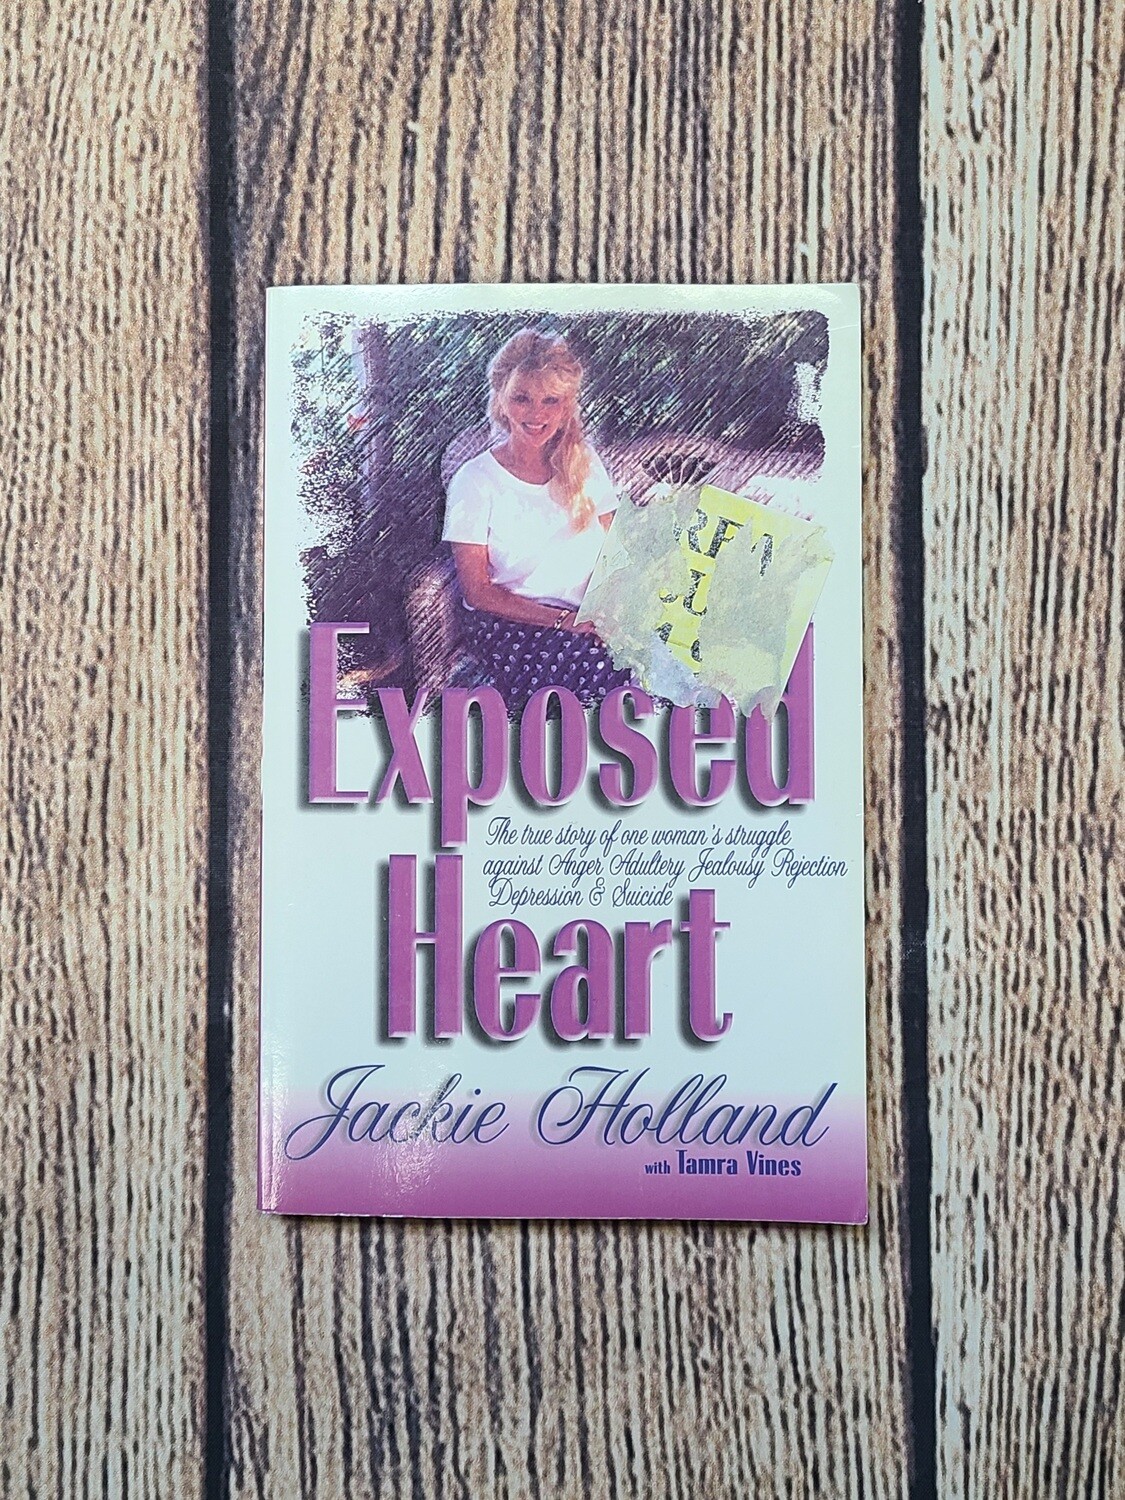 Exposed Heart by Jackie Holland with Tamra Vines